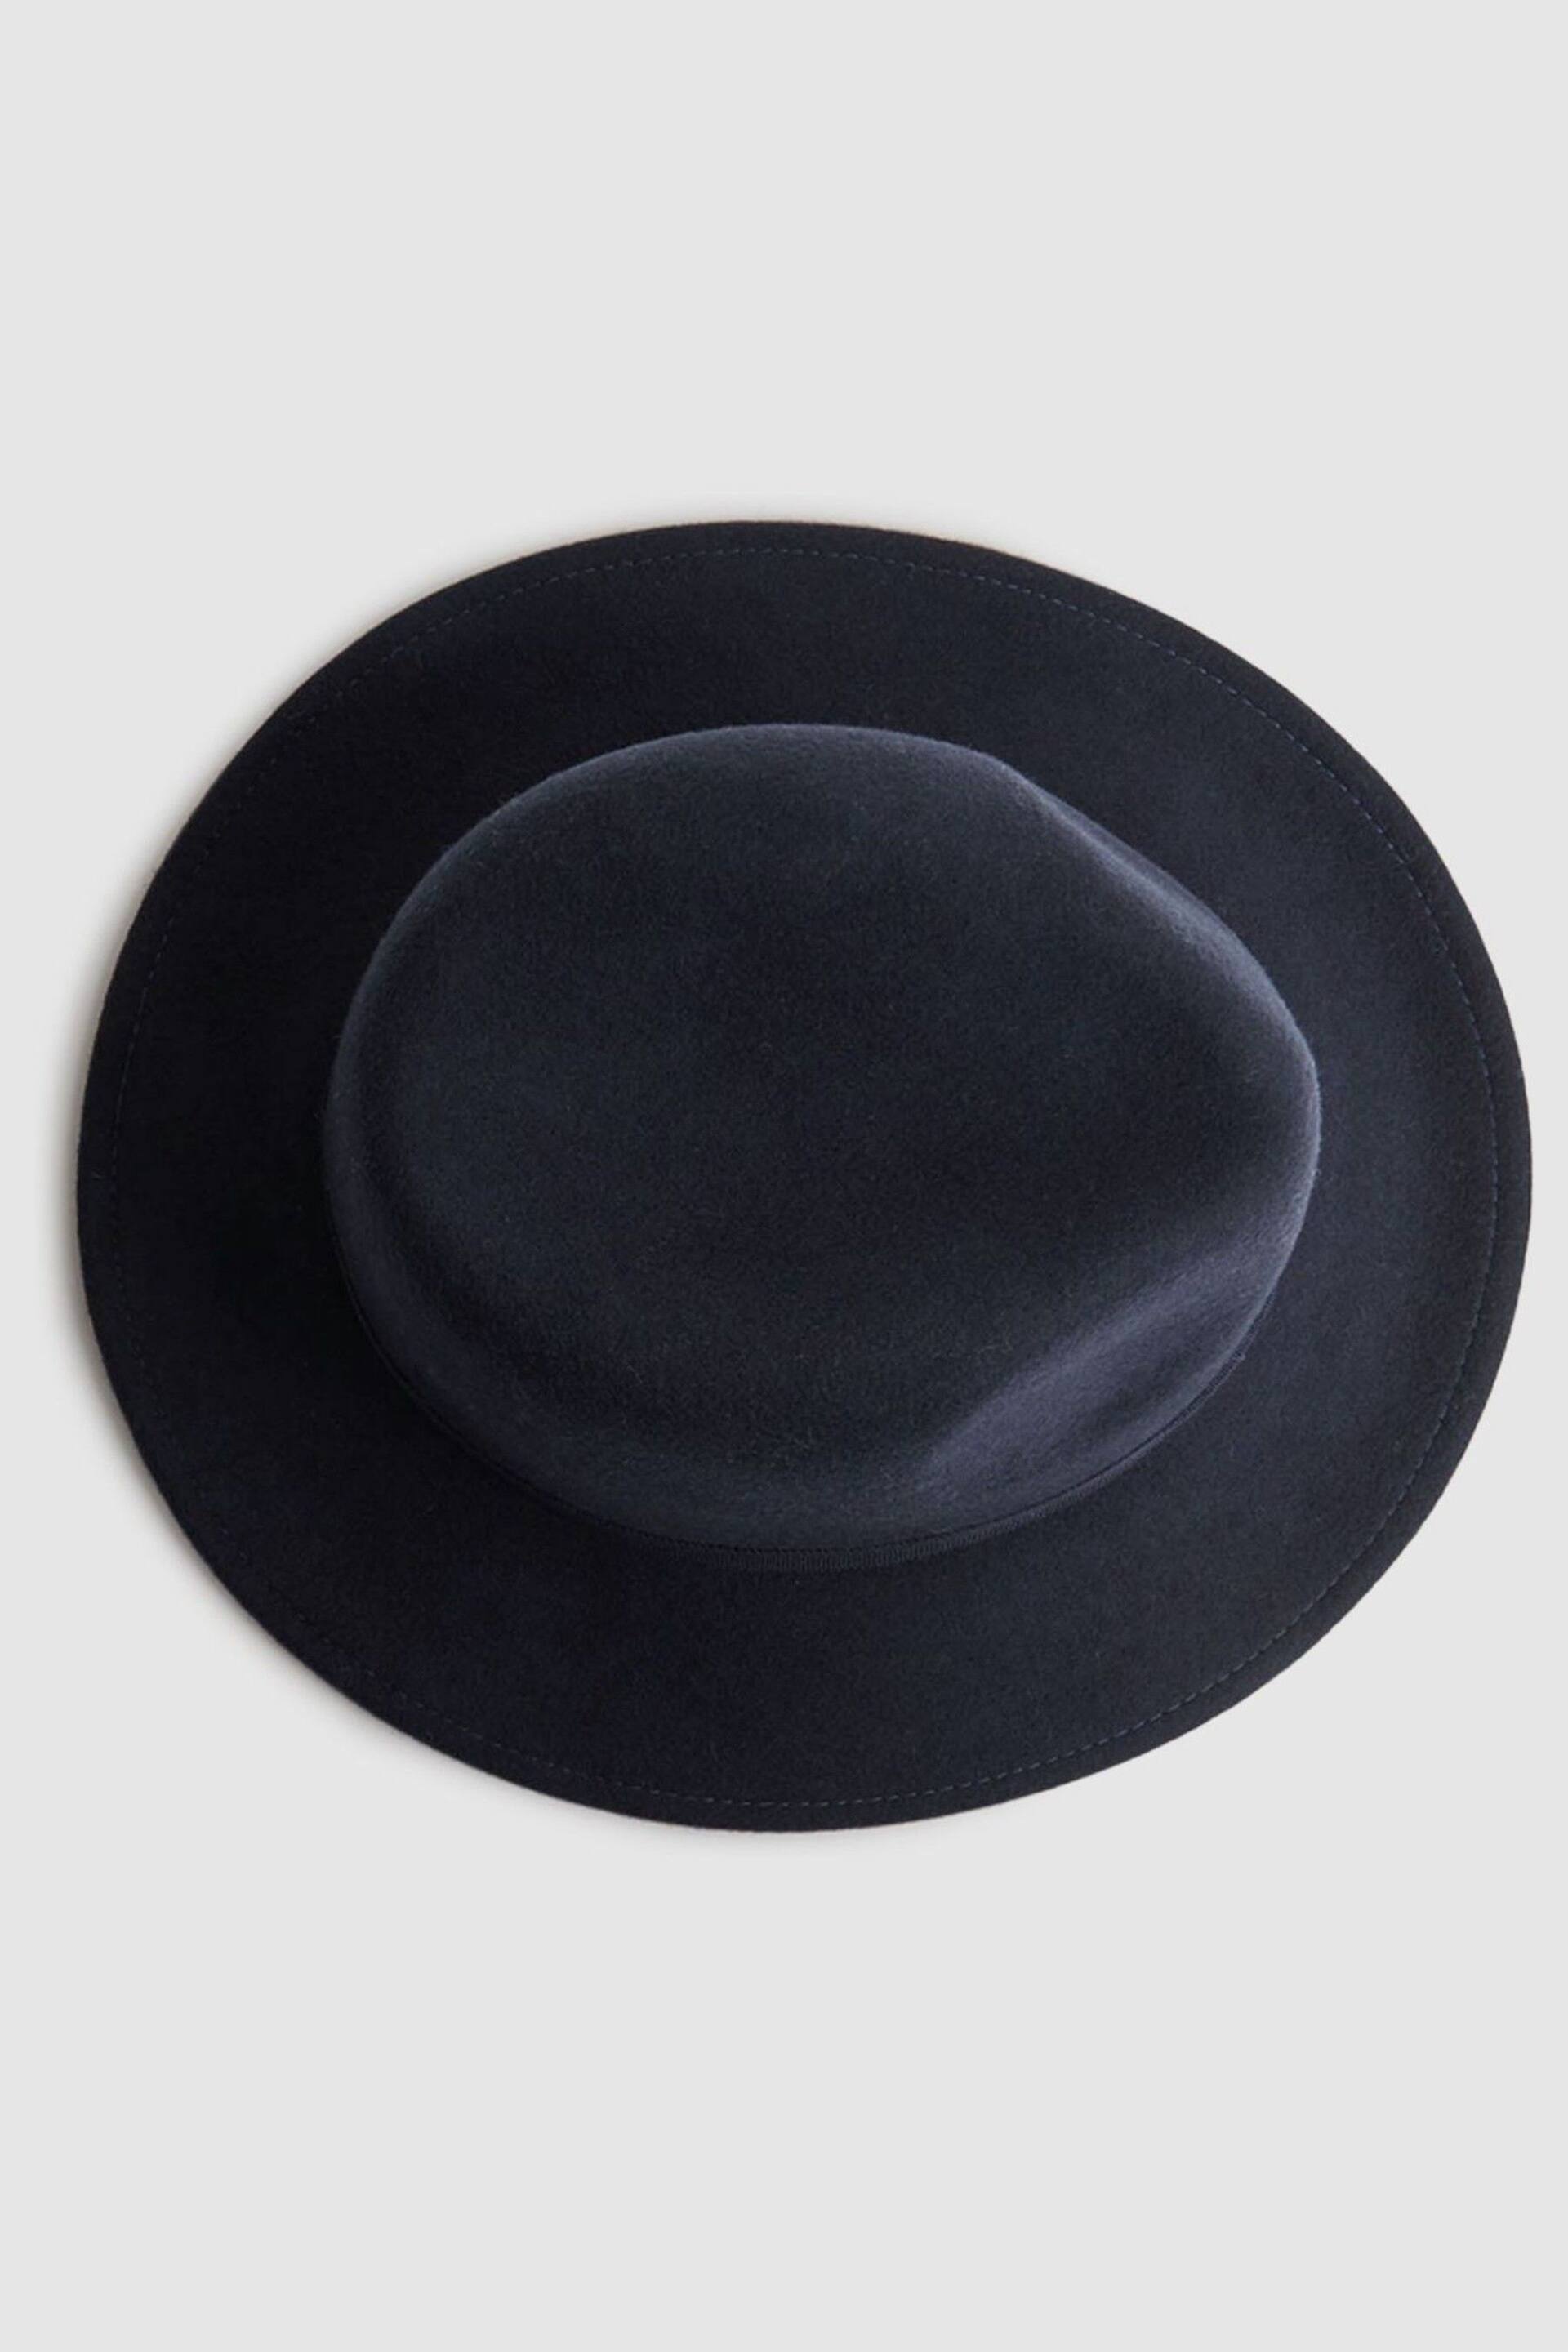 Reiss Navy Ally Wool Fedora Hat - Image 4 of 5